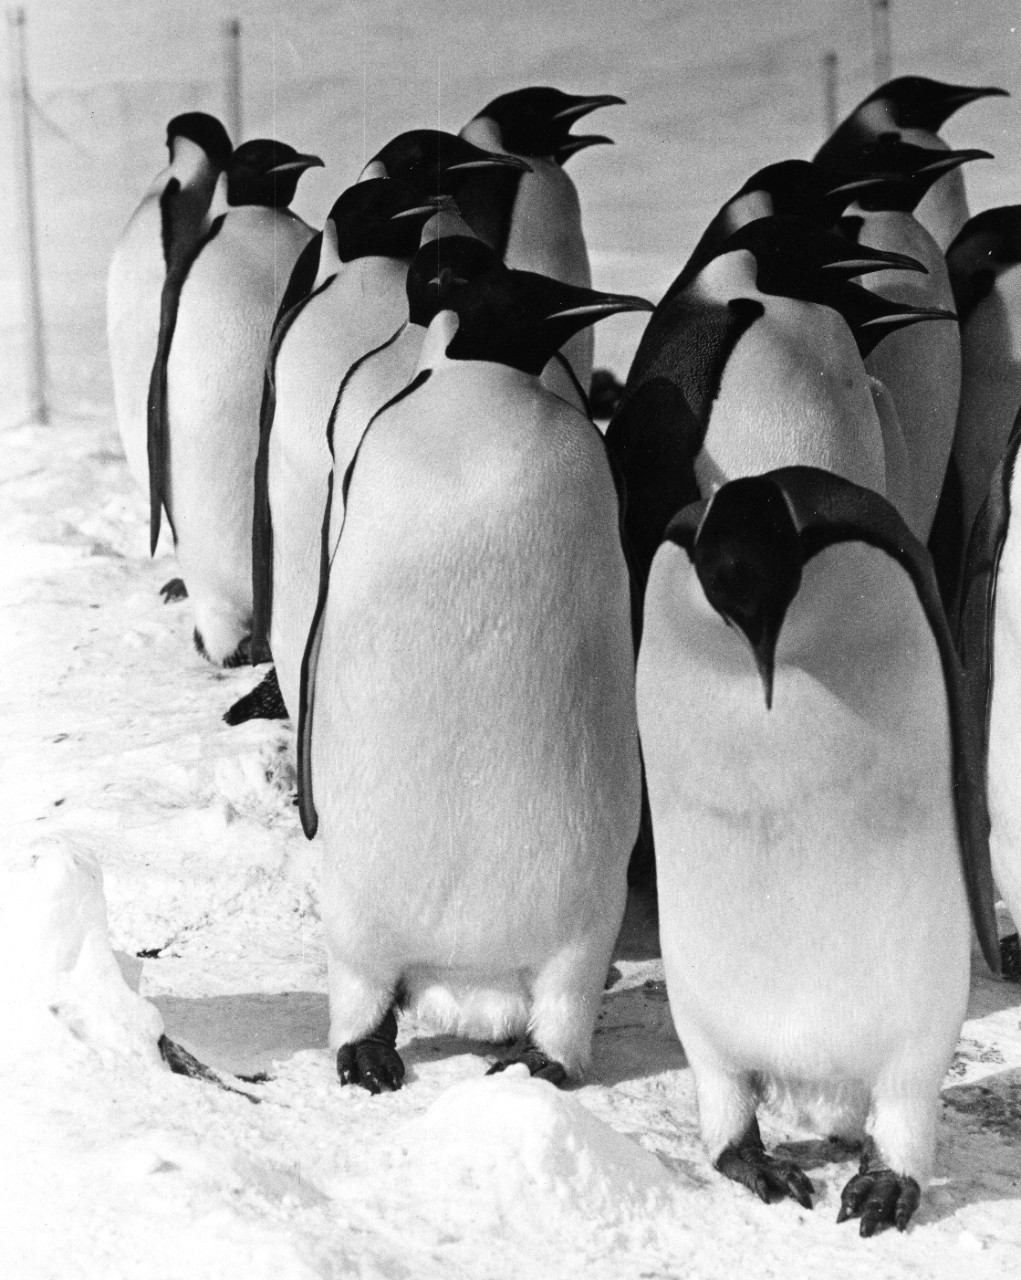 A group of Emperor Penguins at McMurdo Station, Antarctica. The penguins are part of a group captured by employees of Sea World of San Diego, California.